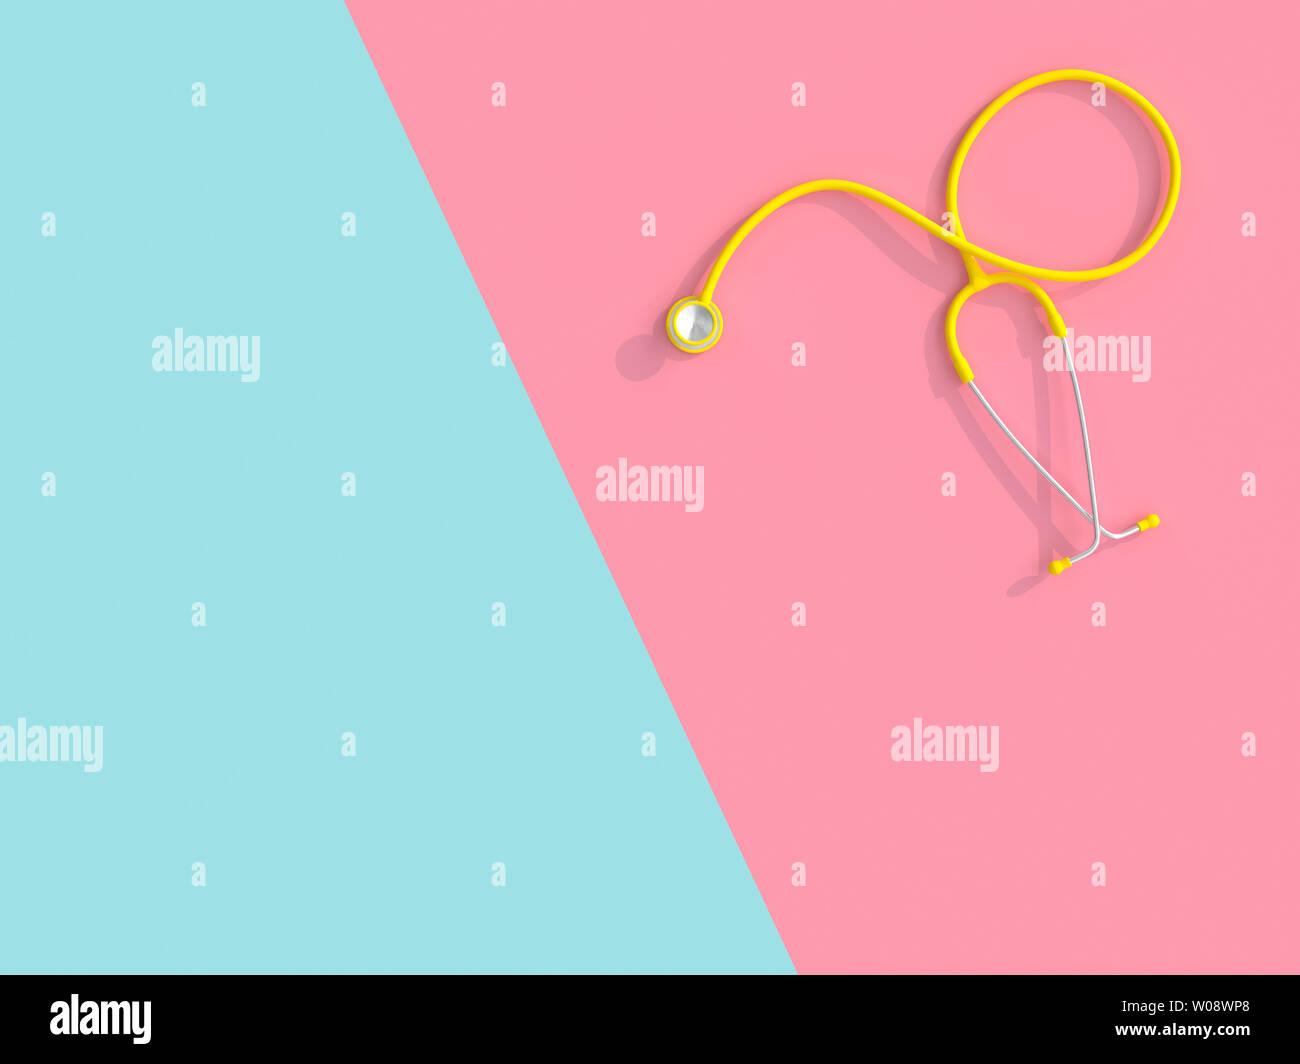 3d image of a yellow stethoscope on a pink and blue background. Health and medicine concept. Stock Photo